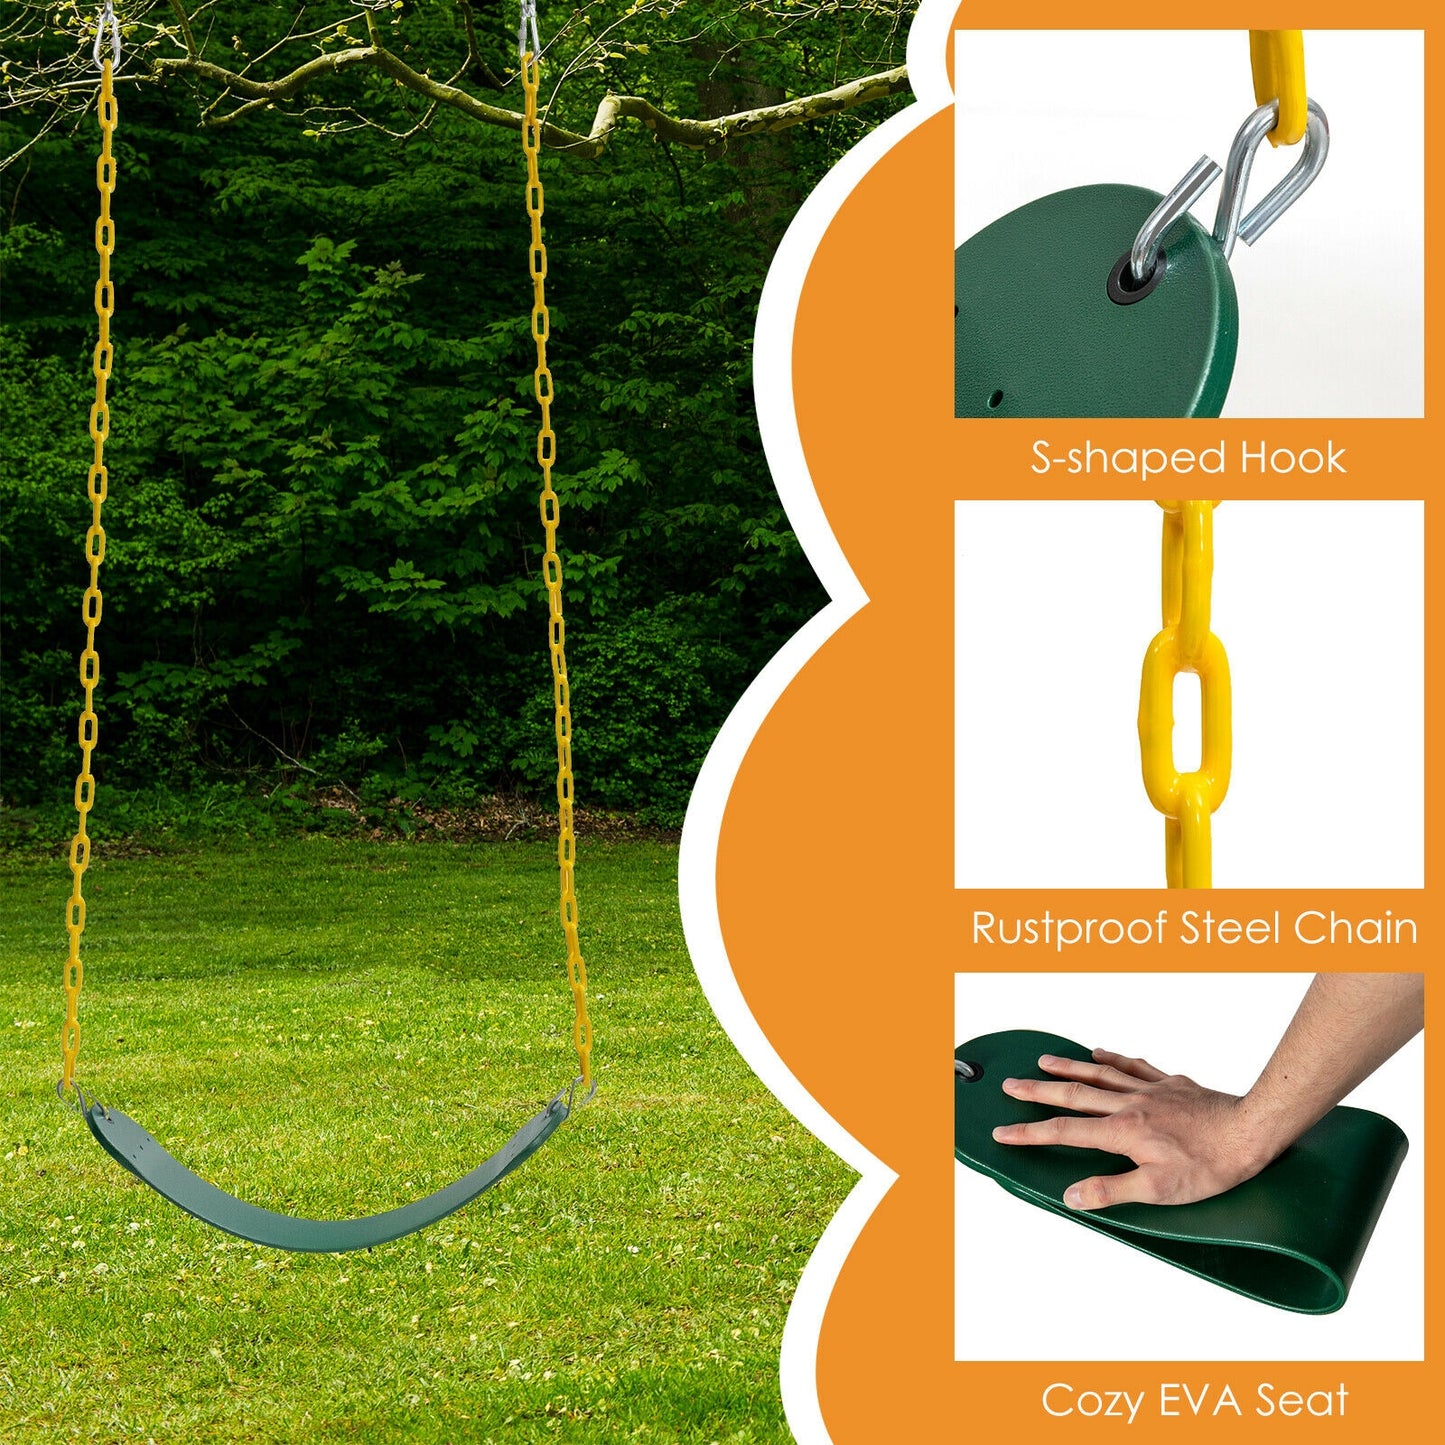 2-Pack Swing Set Swing Seat Replacement and Saucer Tree Swing (Without Stand)